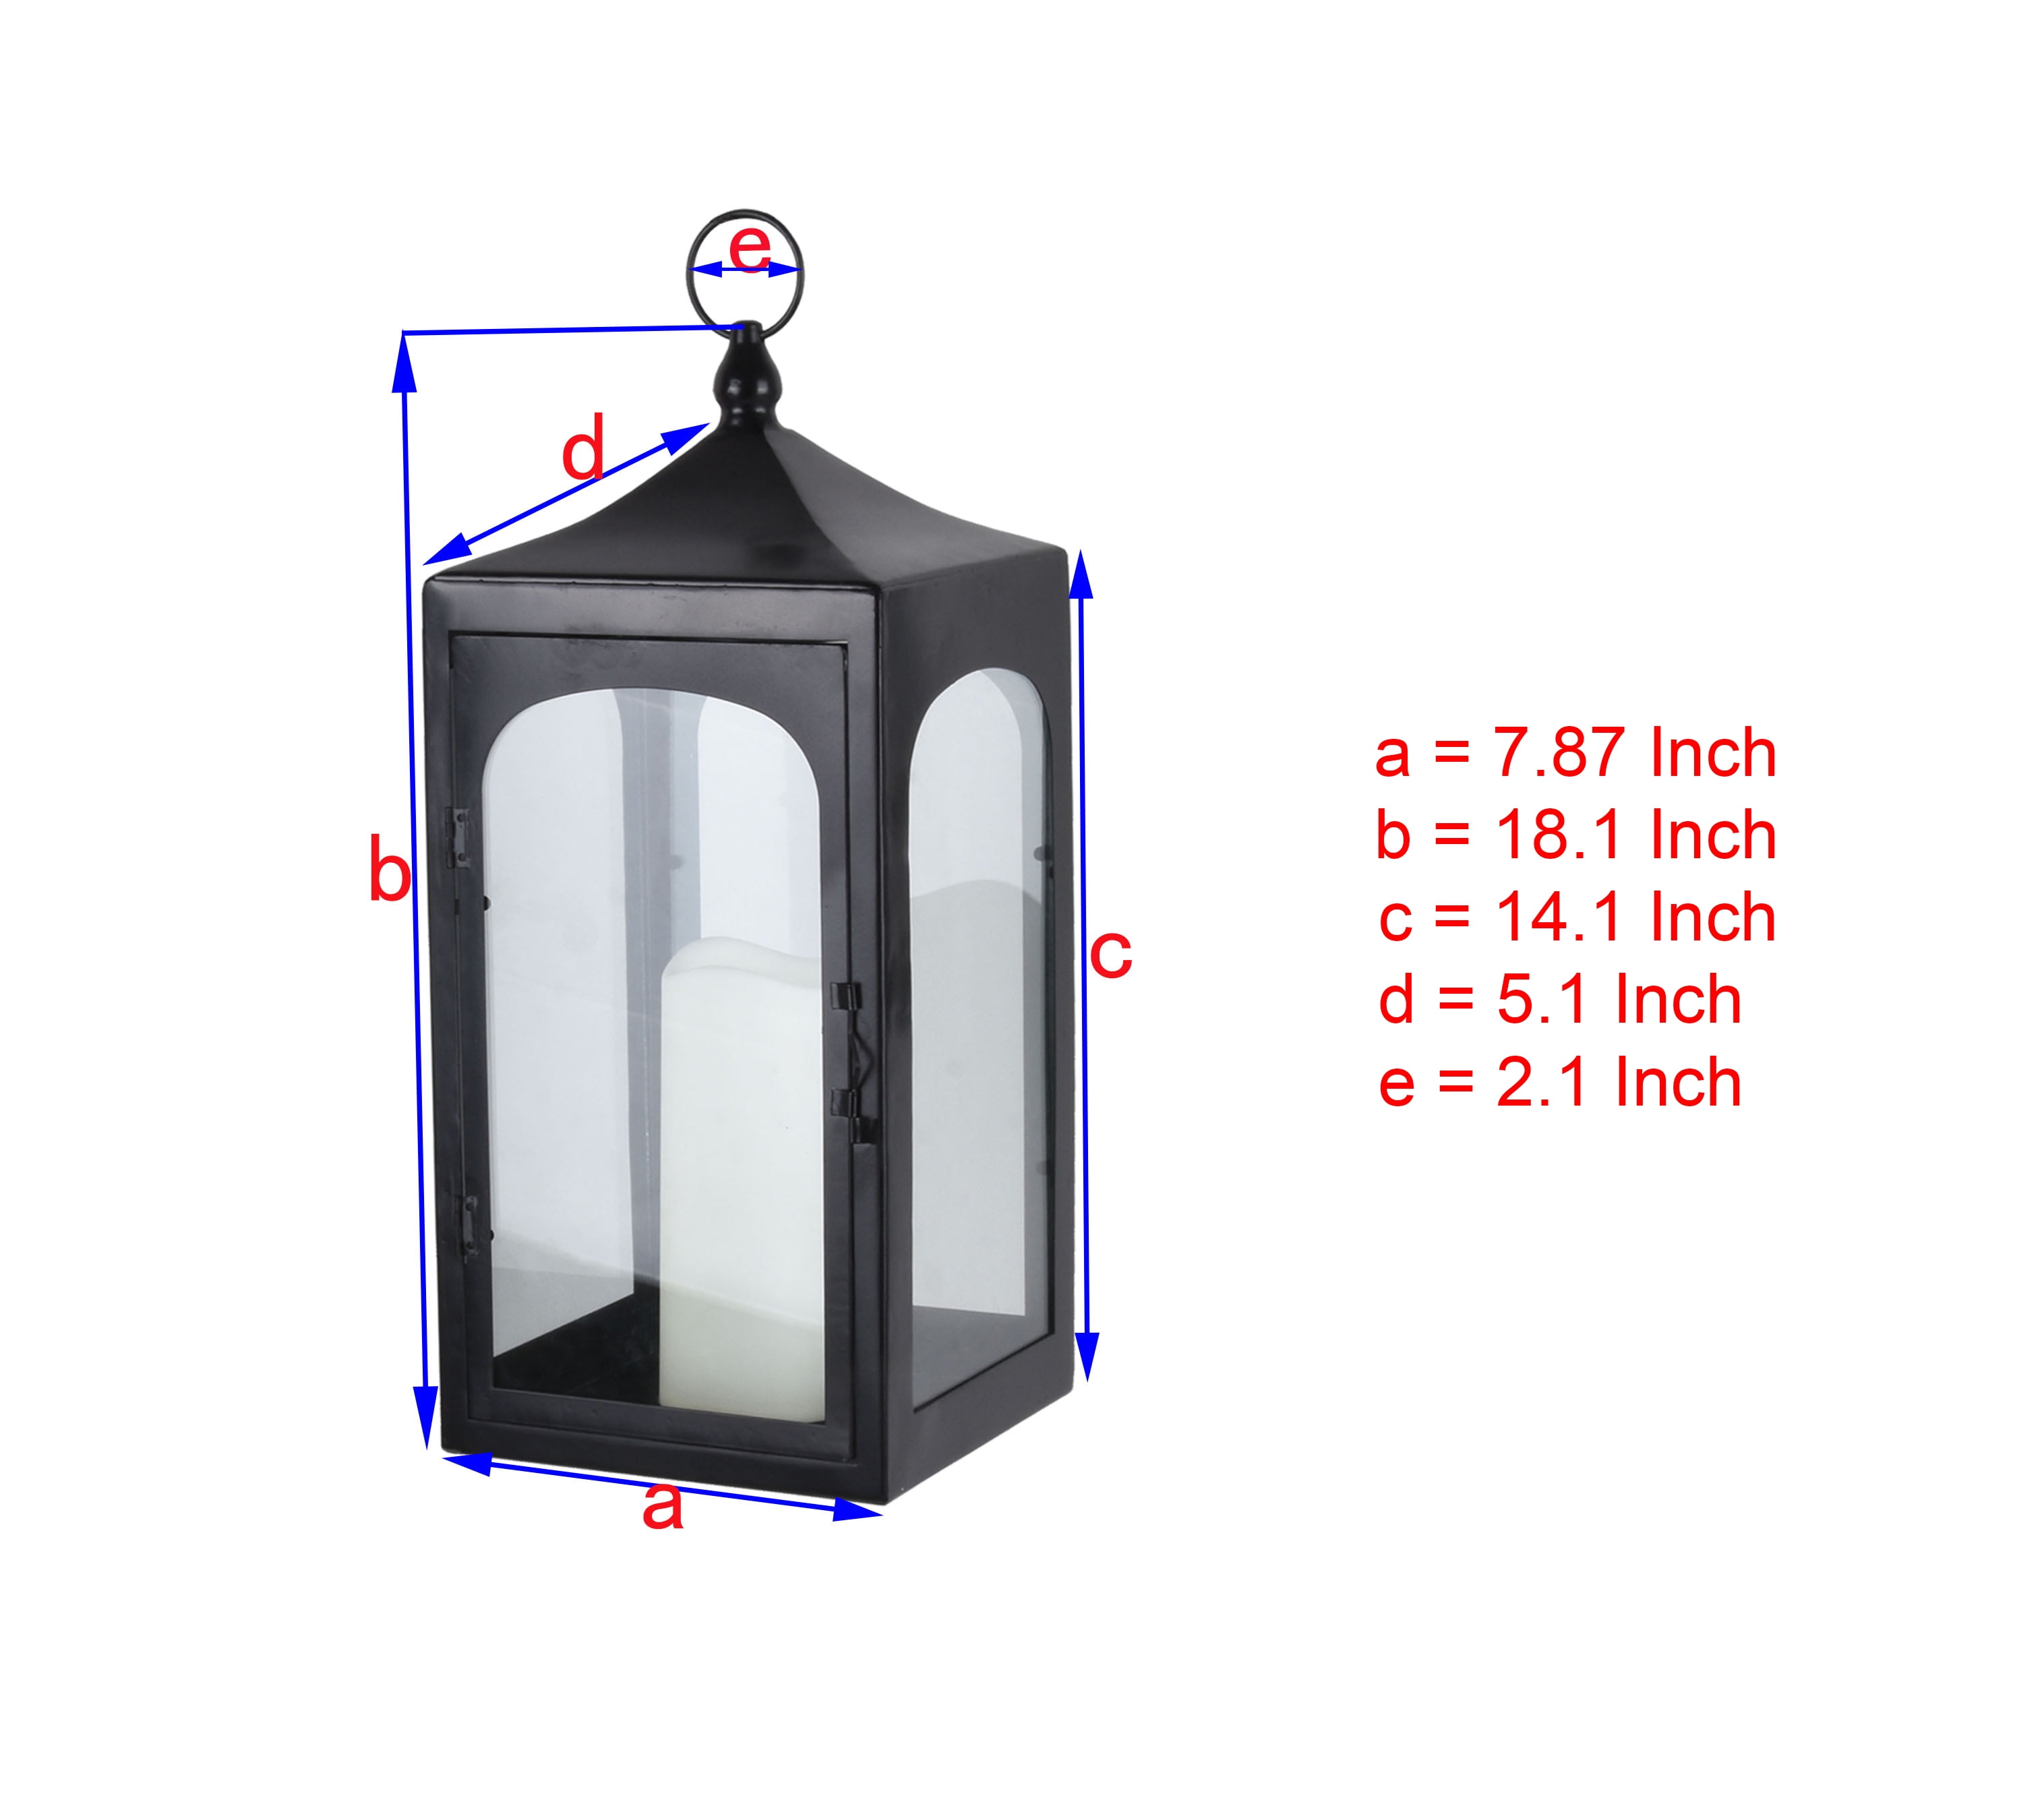 Outdoor Battery Alta Candle Lantern, Black, 2 pack